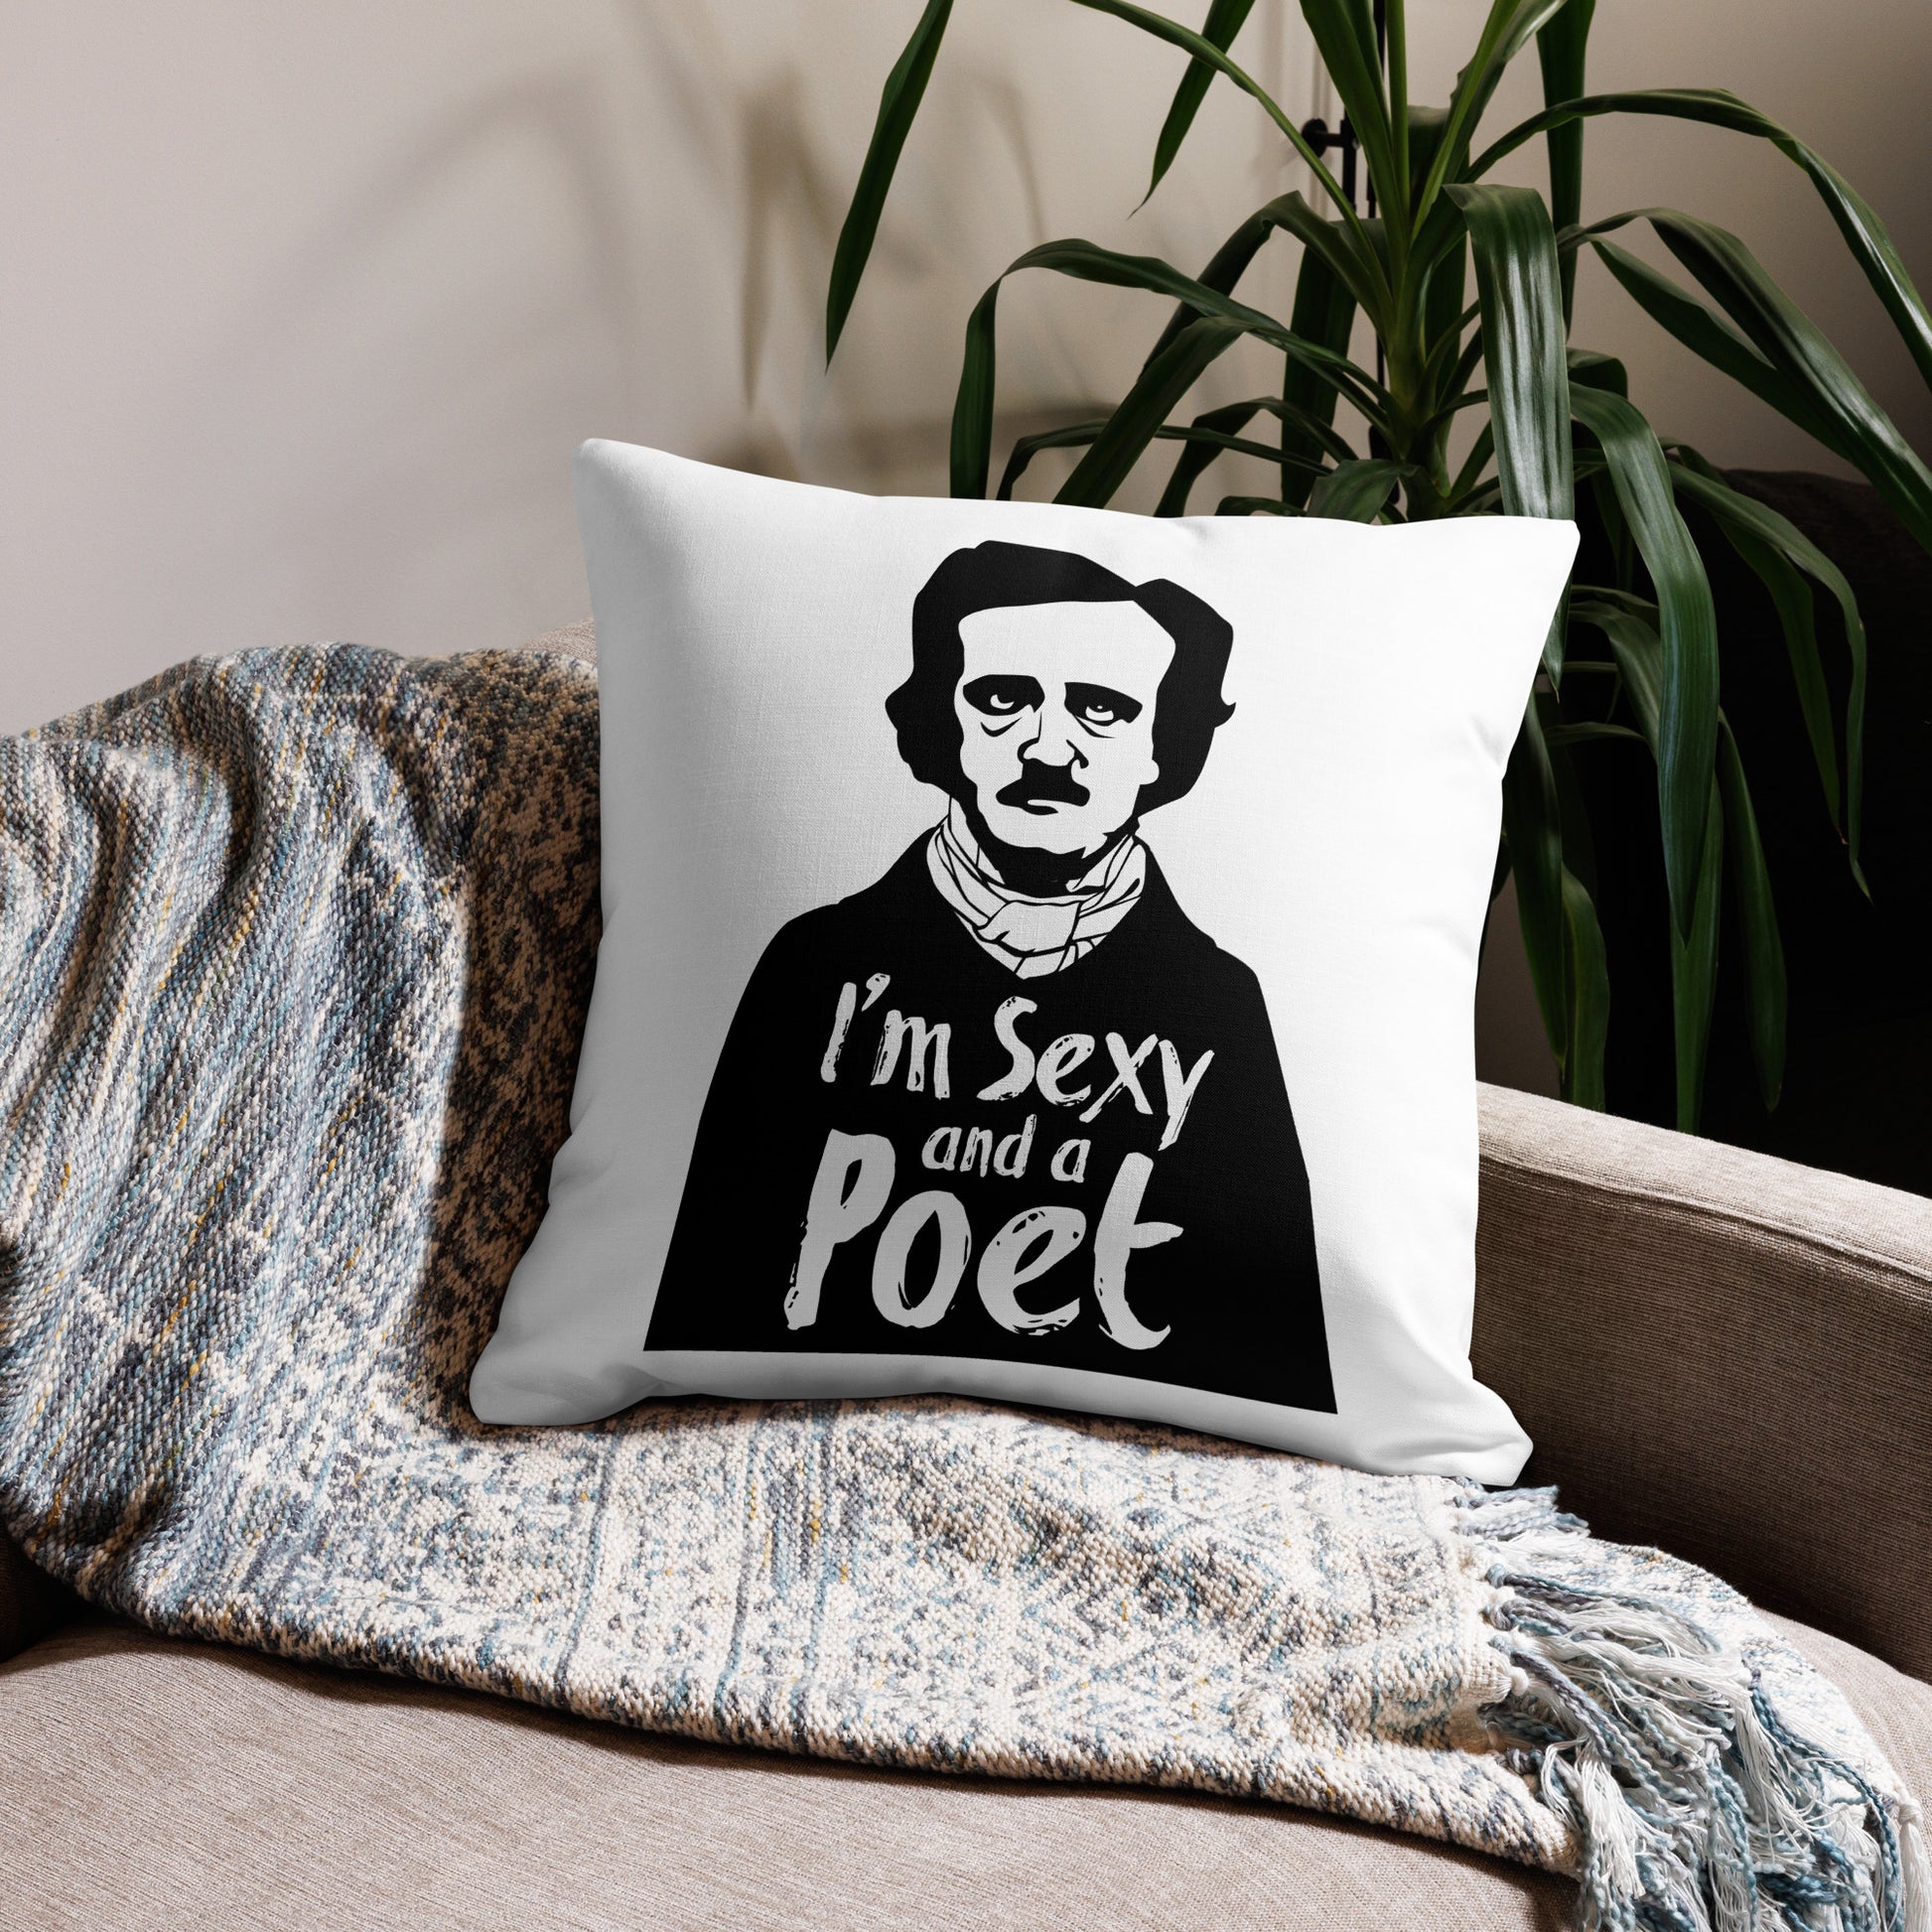 Edgar Allan Poe 'I'm Sexy and a Poet' premium pillow with linen-feel case and shape-retaining insert - 22x22